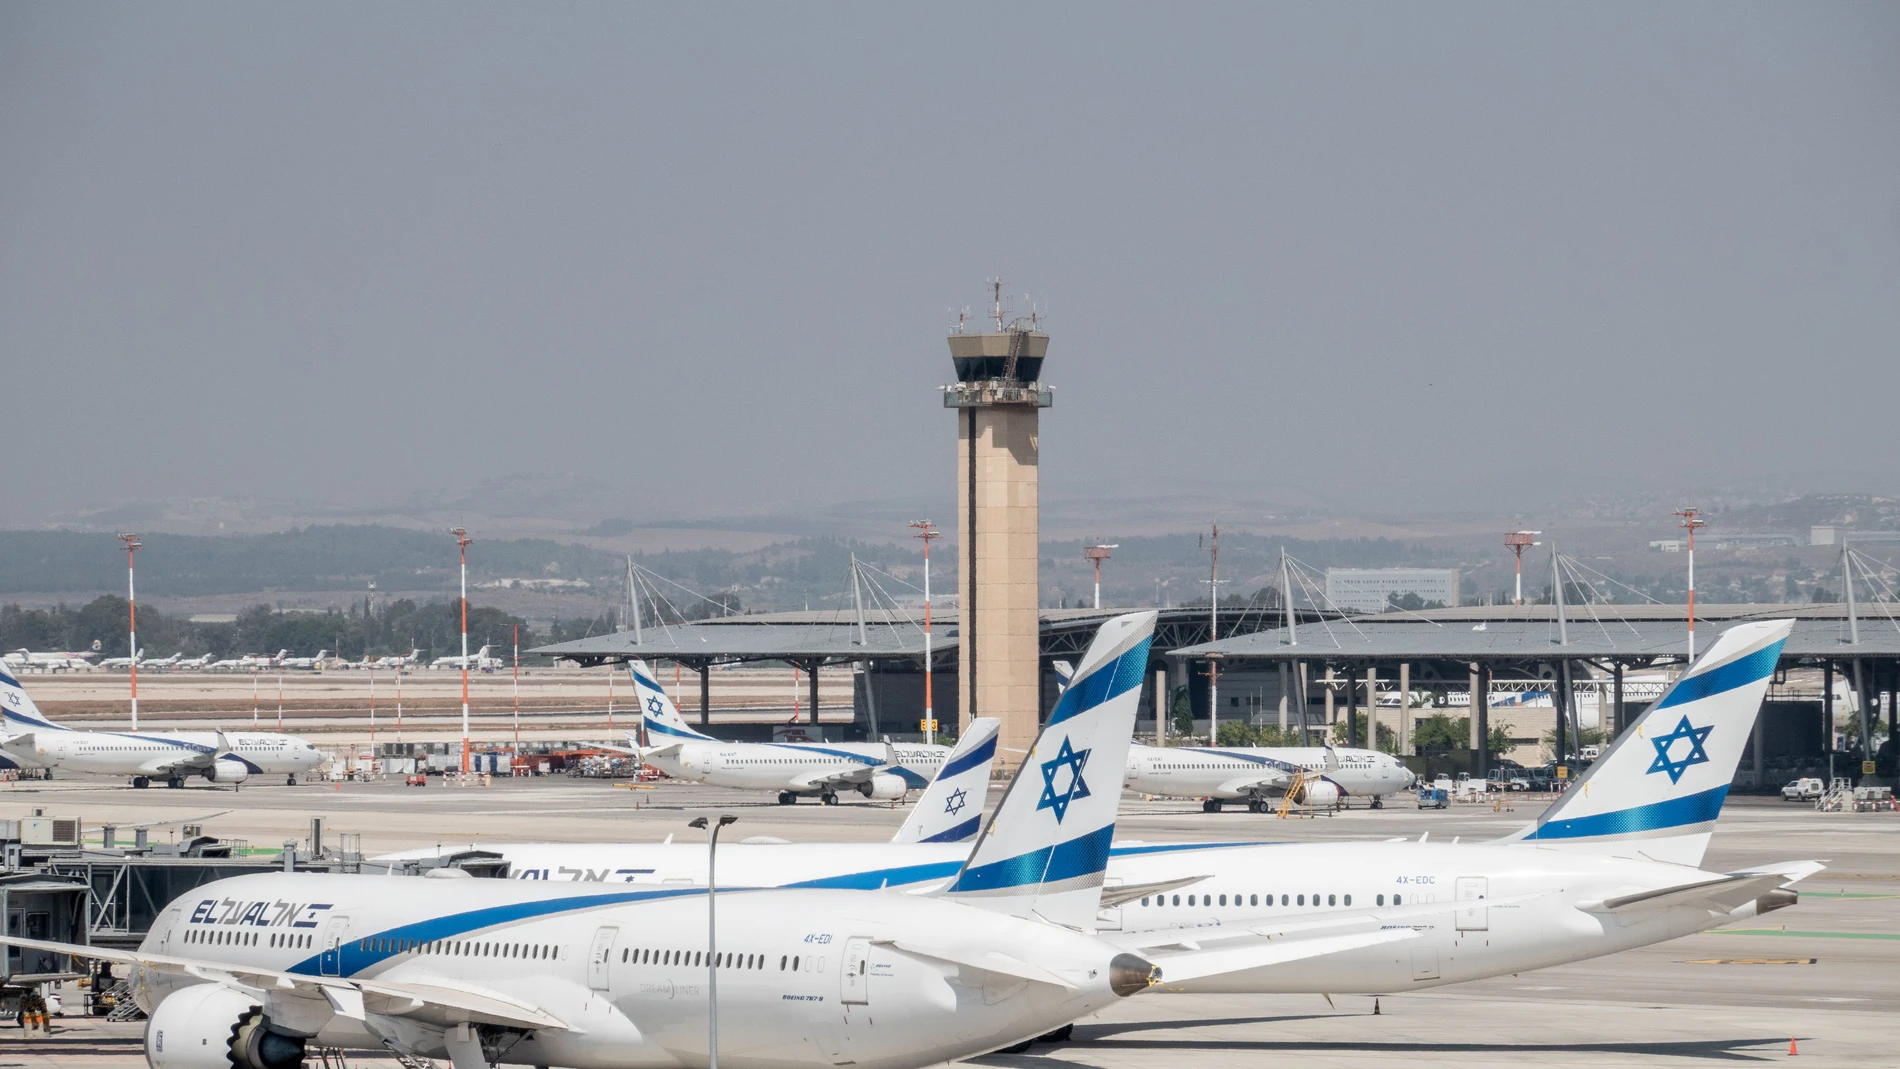 August 3, 2020, Tel Aviv, Israel: El Al Airlines planes are seen parked at Tel Aviv's Ben Gurion International Airport during the Coronavirus crisis. Travel restrictions and flight cancellations due to the outbreak leave the airport almost totally empty. (Foto de ARCHIVO) 03/08/2020